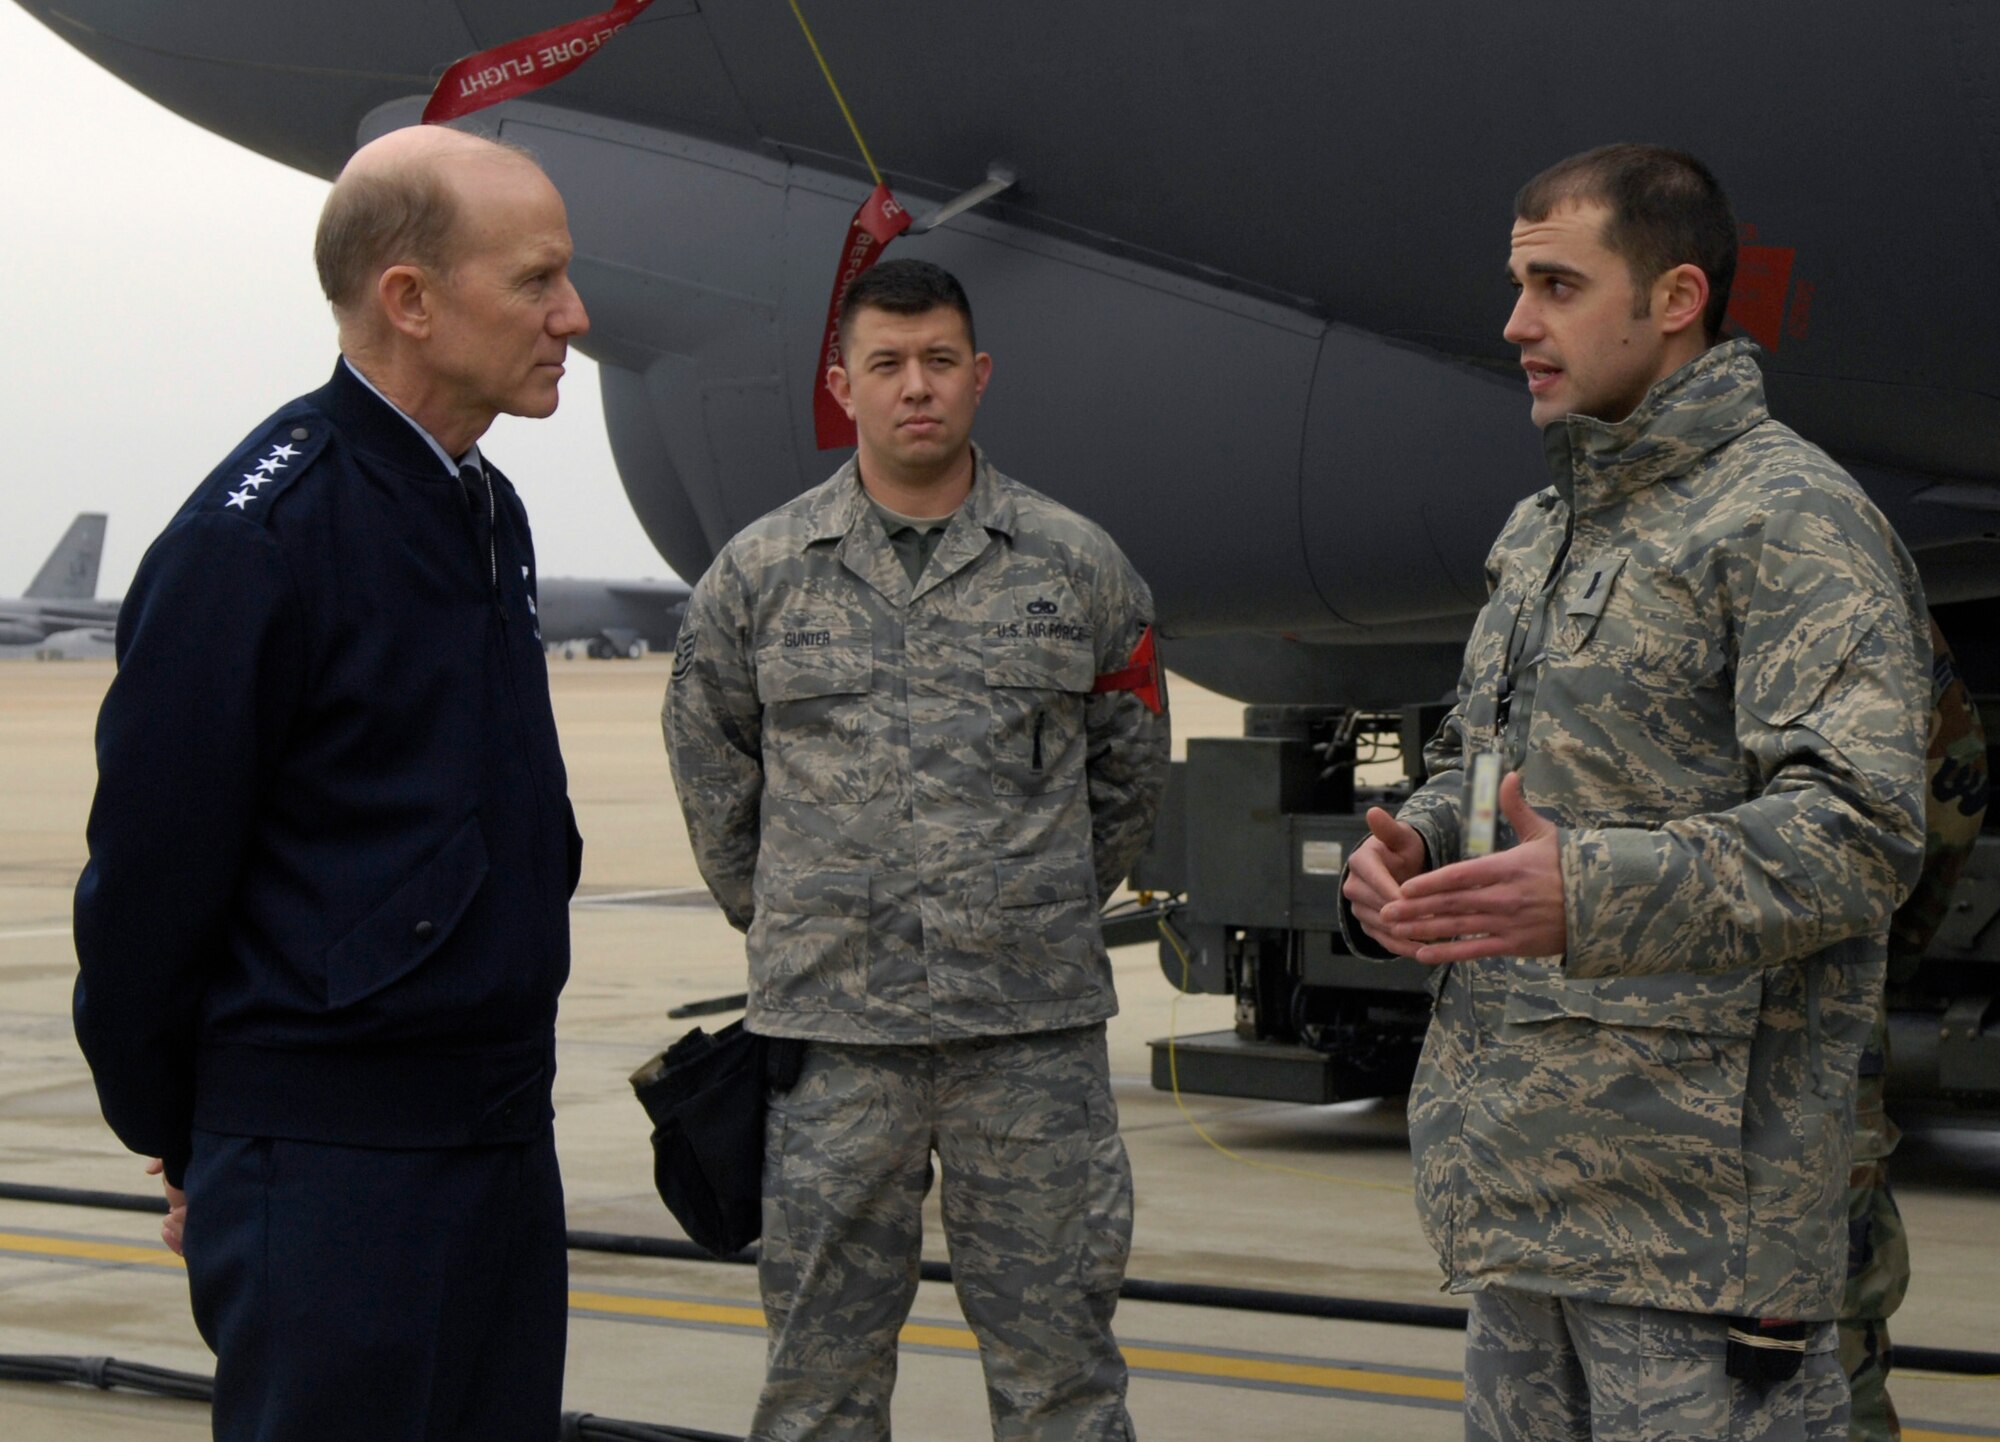 1st Lt. Zach Myhra, 96th Aircraft Maintenance Unit assistant officer in charge, briefs Gen. John D. W. Corley, Air Combat Command Commander, on the nuclear capability and stewardship of our most lethal weapons and health of our B-52H Stratofortress fleet while Staff Sgt. Robert Gunter, 96th Aircraft Maintenance Unit load team chief awaits patiently to brief the general as well. General Corley spoke to many Airmen on his visit to Barksdale to have a feel for what we need to improve at the 2d Bomb Wing. (Senior Airman Alexandra M Sandoval/U.S. Air Force)